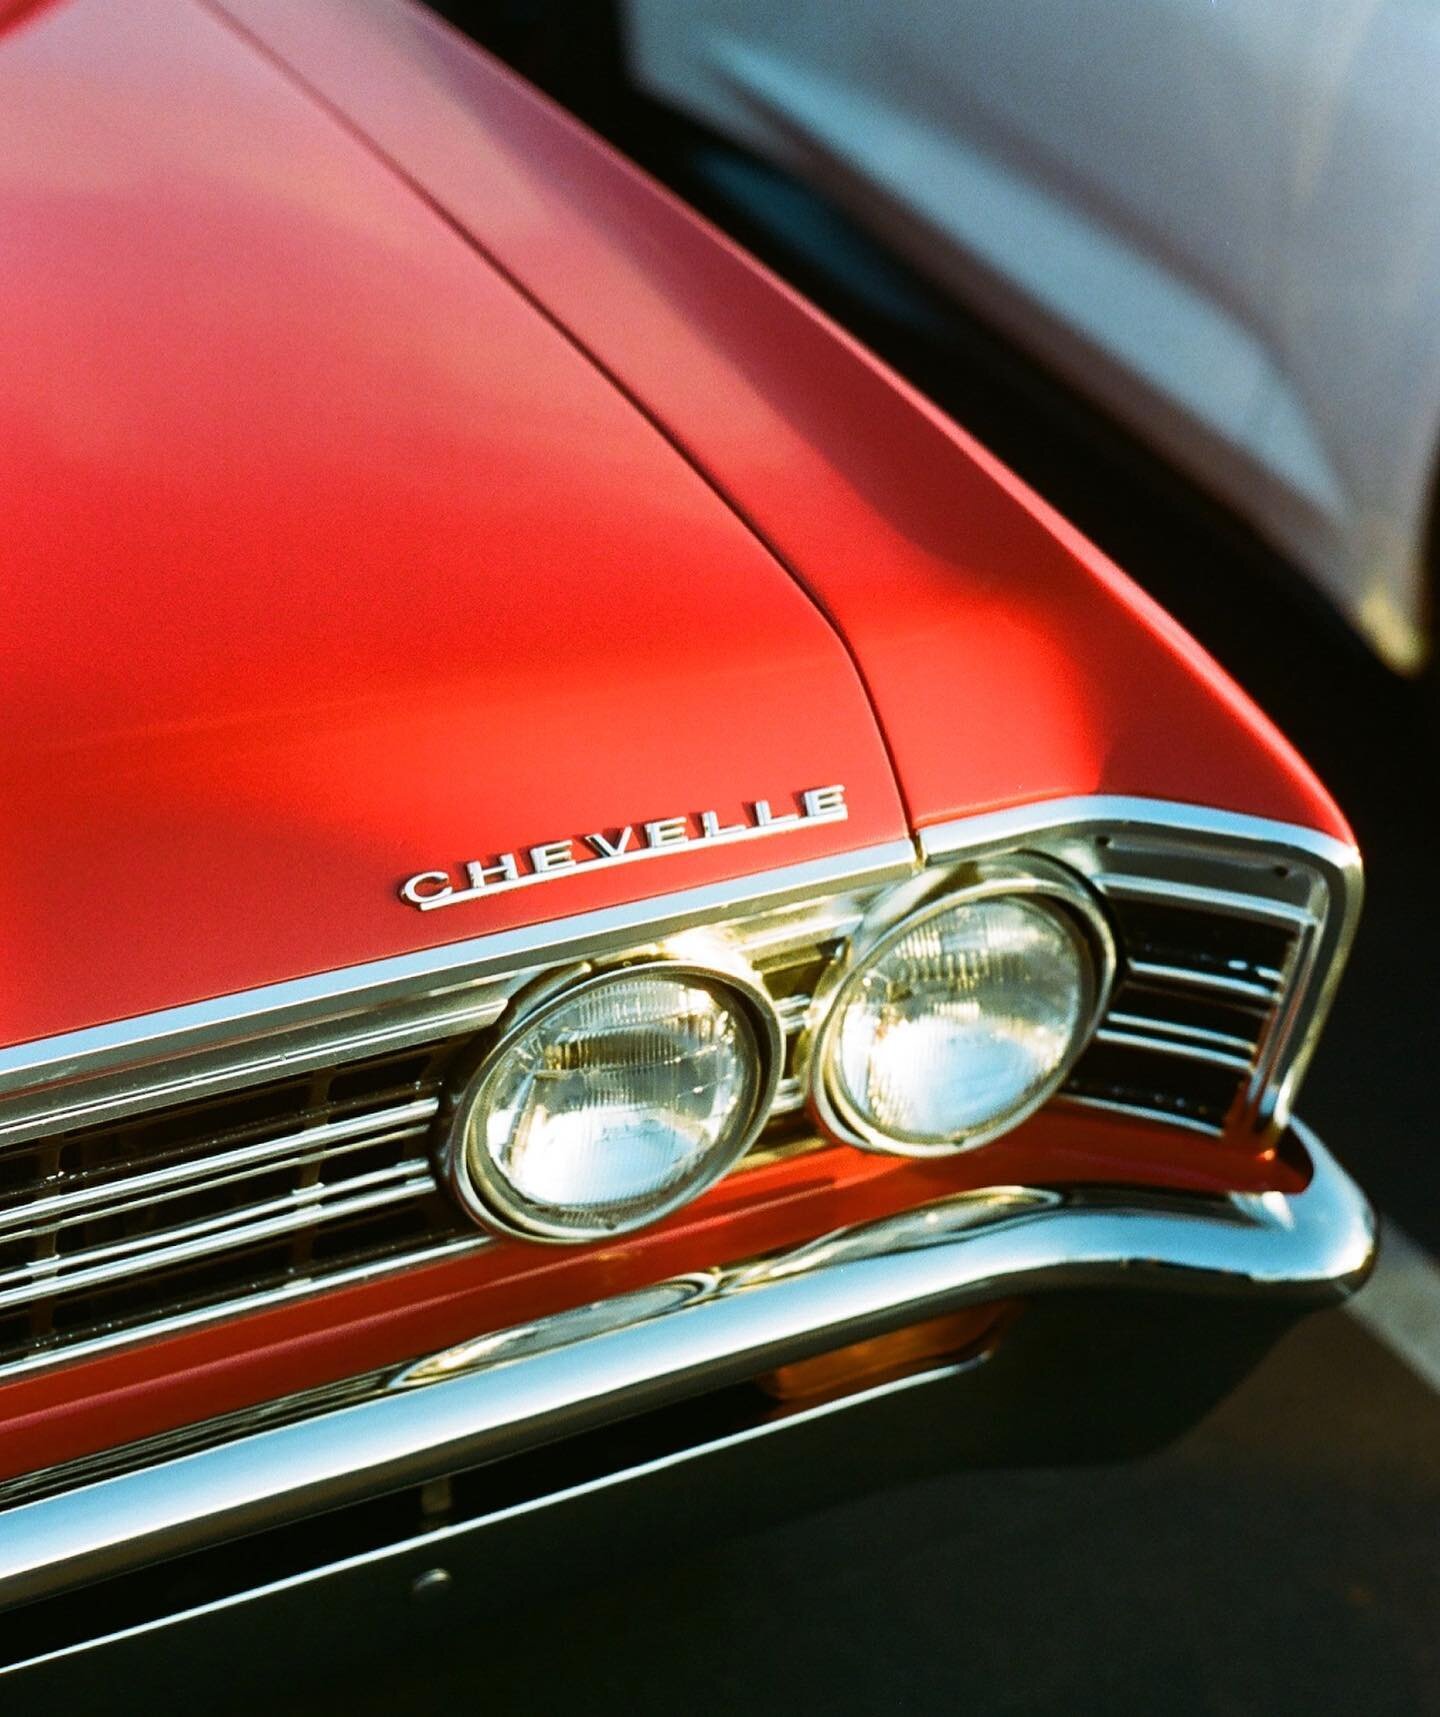 Start your engines 💨 Join us September 18th from 10-2pm for the Great Autos Rainbow Car Show 🛞 If you love classic cars and live jazz music, you won't want to miss the Rainbow Car Show, brought to you by @bbealestexasbbq 🍗 Around 70 classic and co